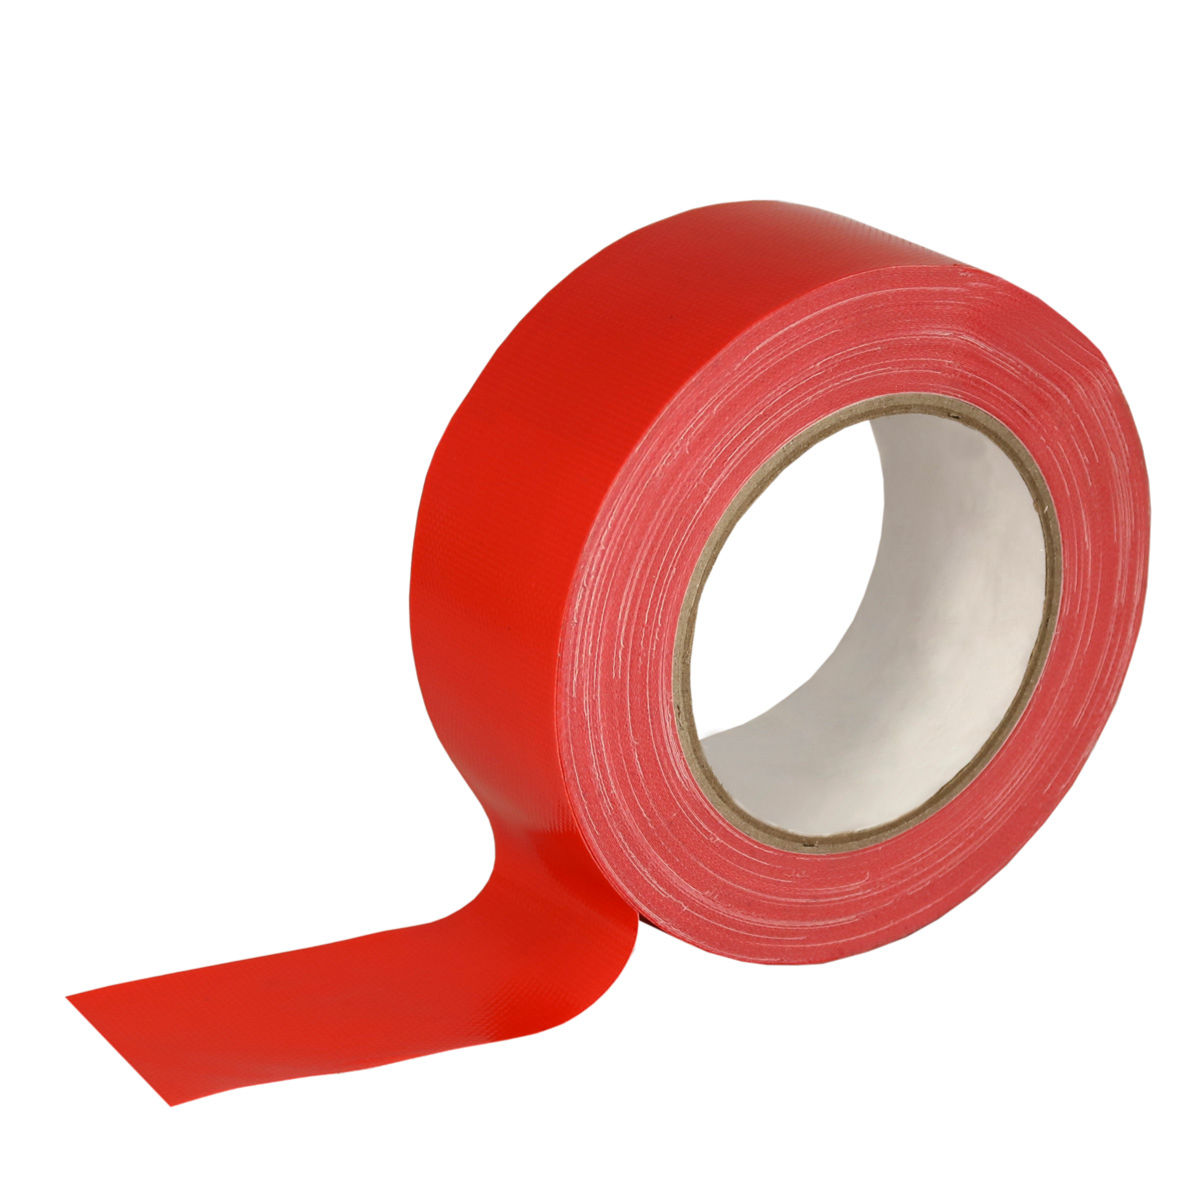 Succesvol Humaan uitzondering Select Quality Duct Tape Rood